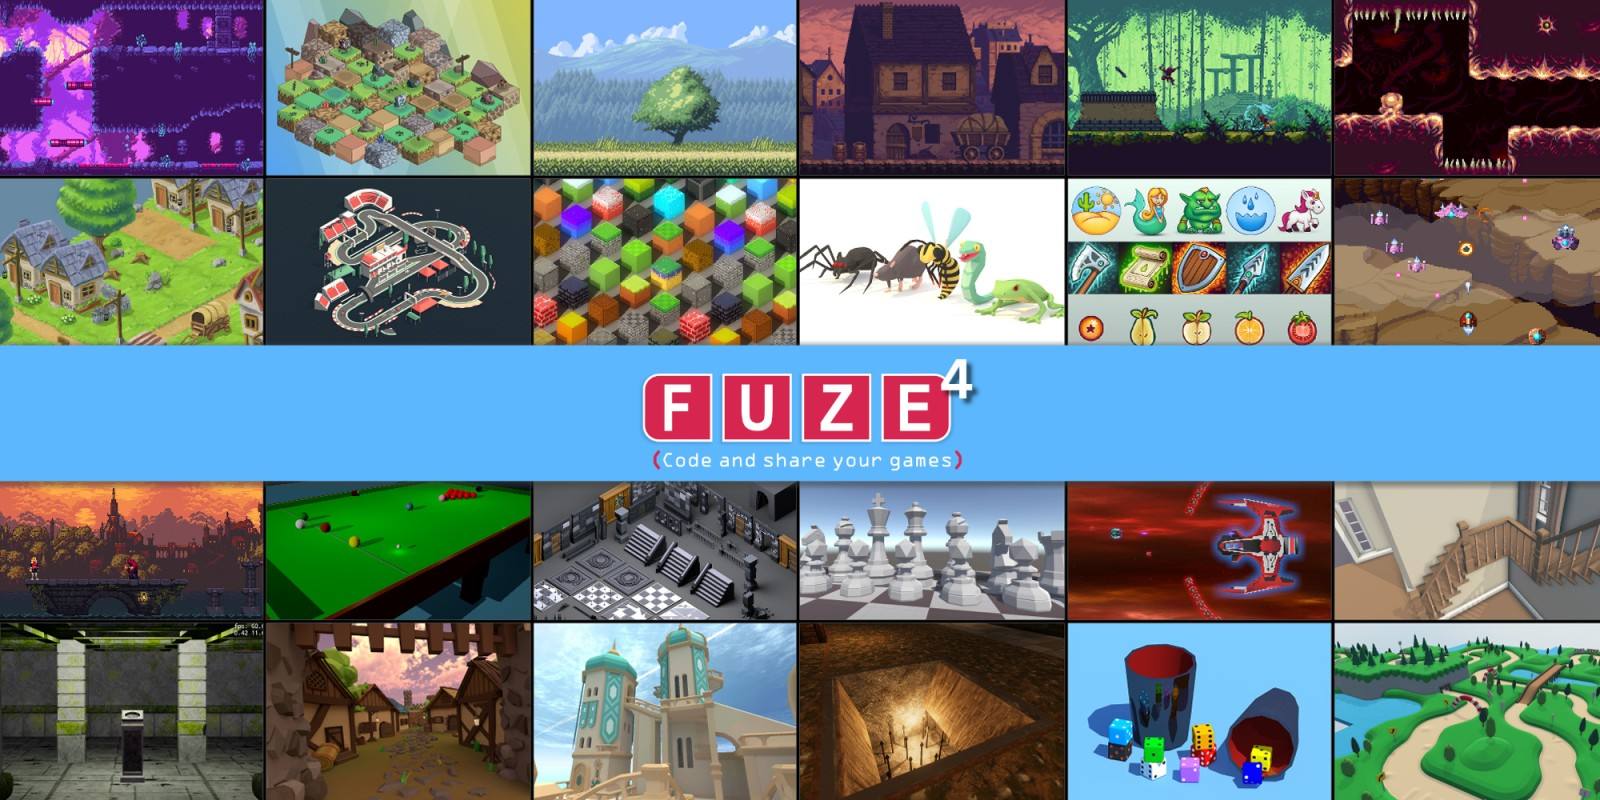 FUZE4 Nintendo Switch Review: Create and Your Own